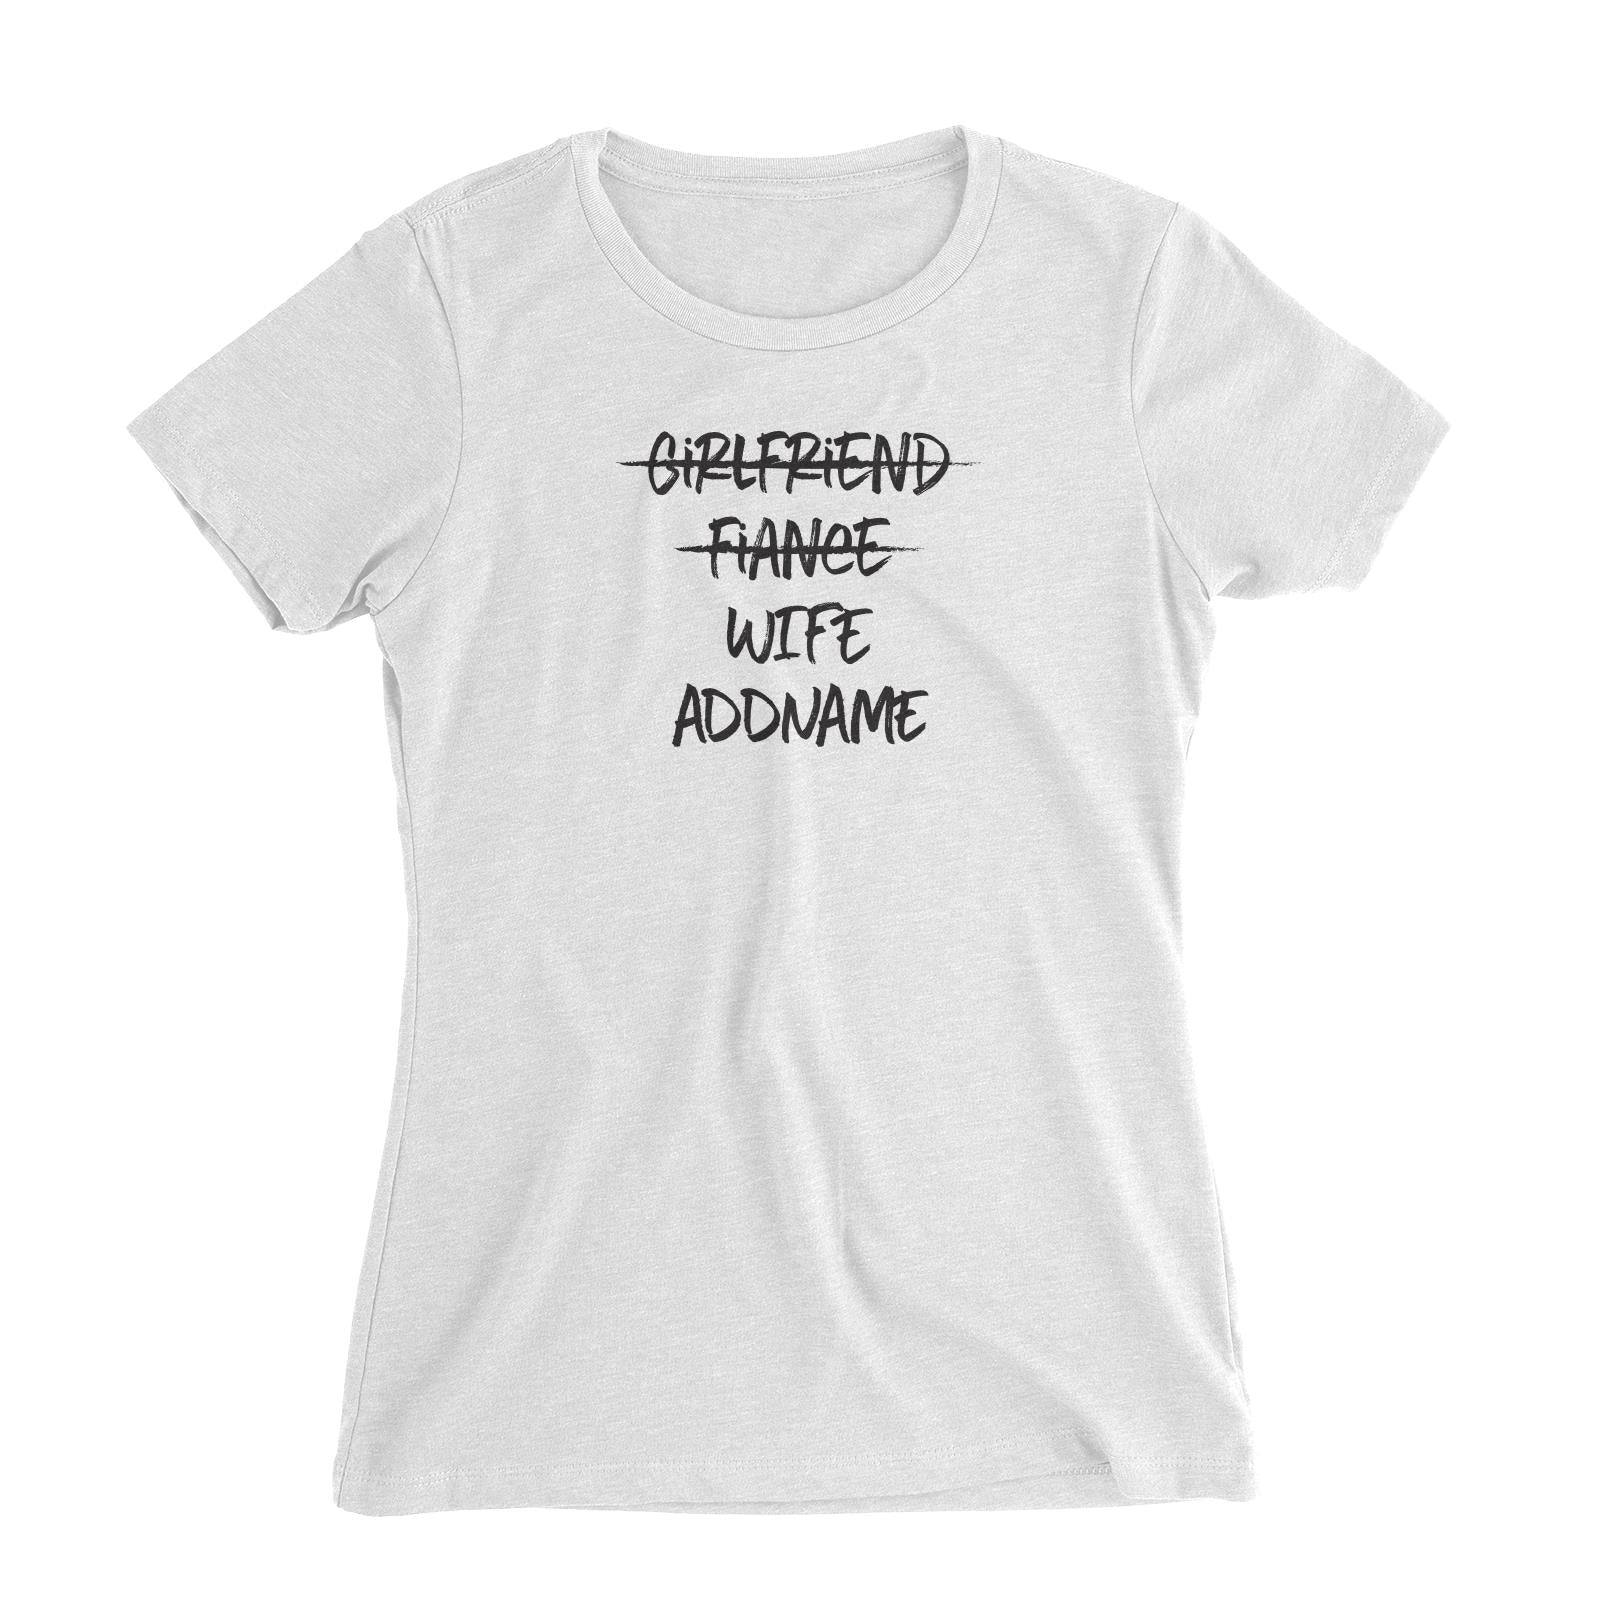 Husband and Wife Girlfriend Fiance Wife Addname Women Slim Fit T-Shirt